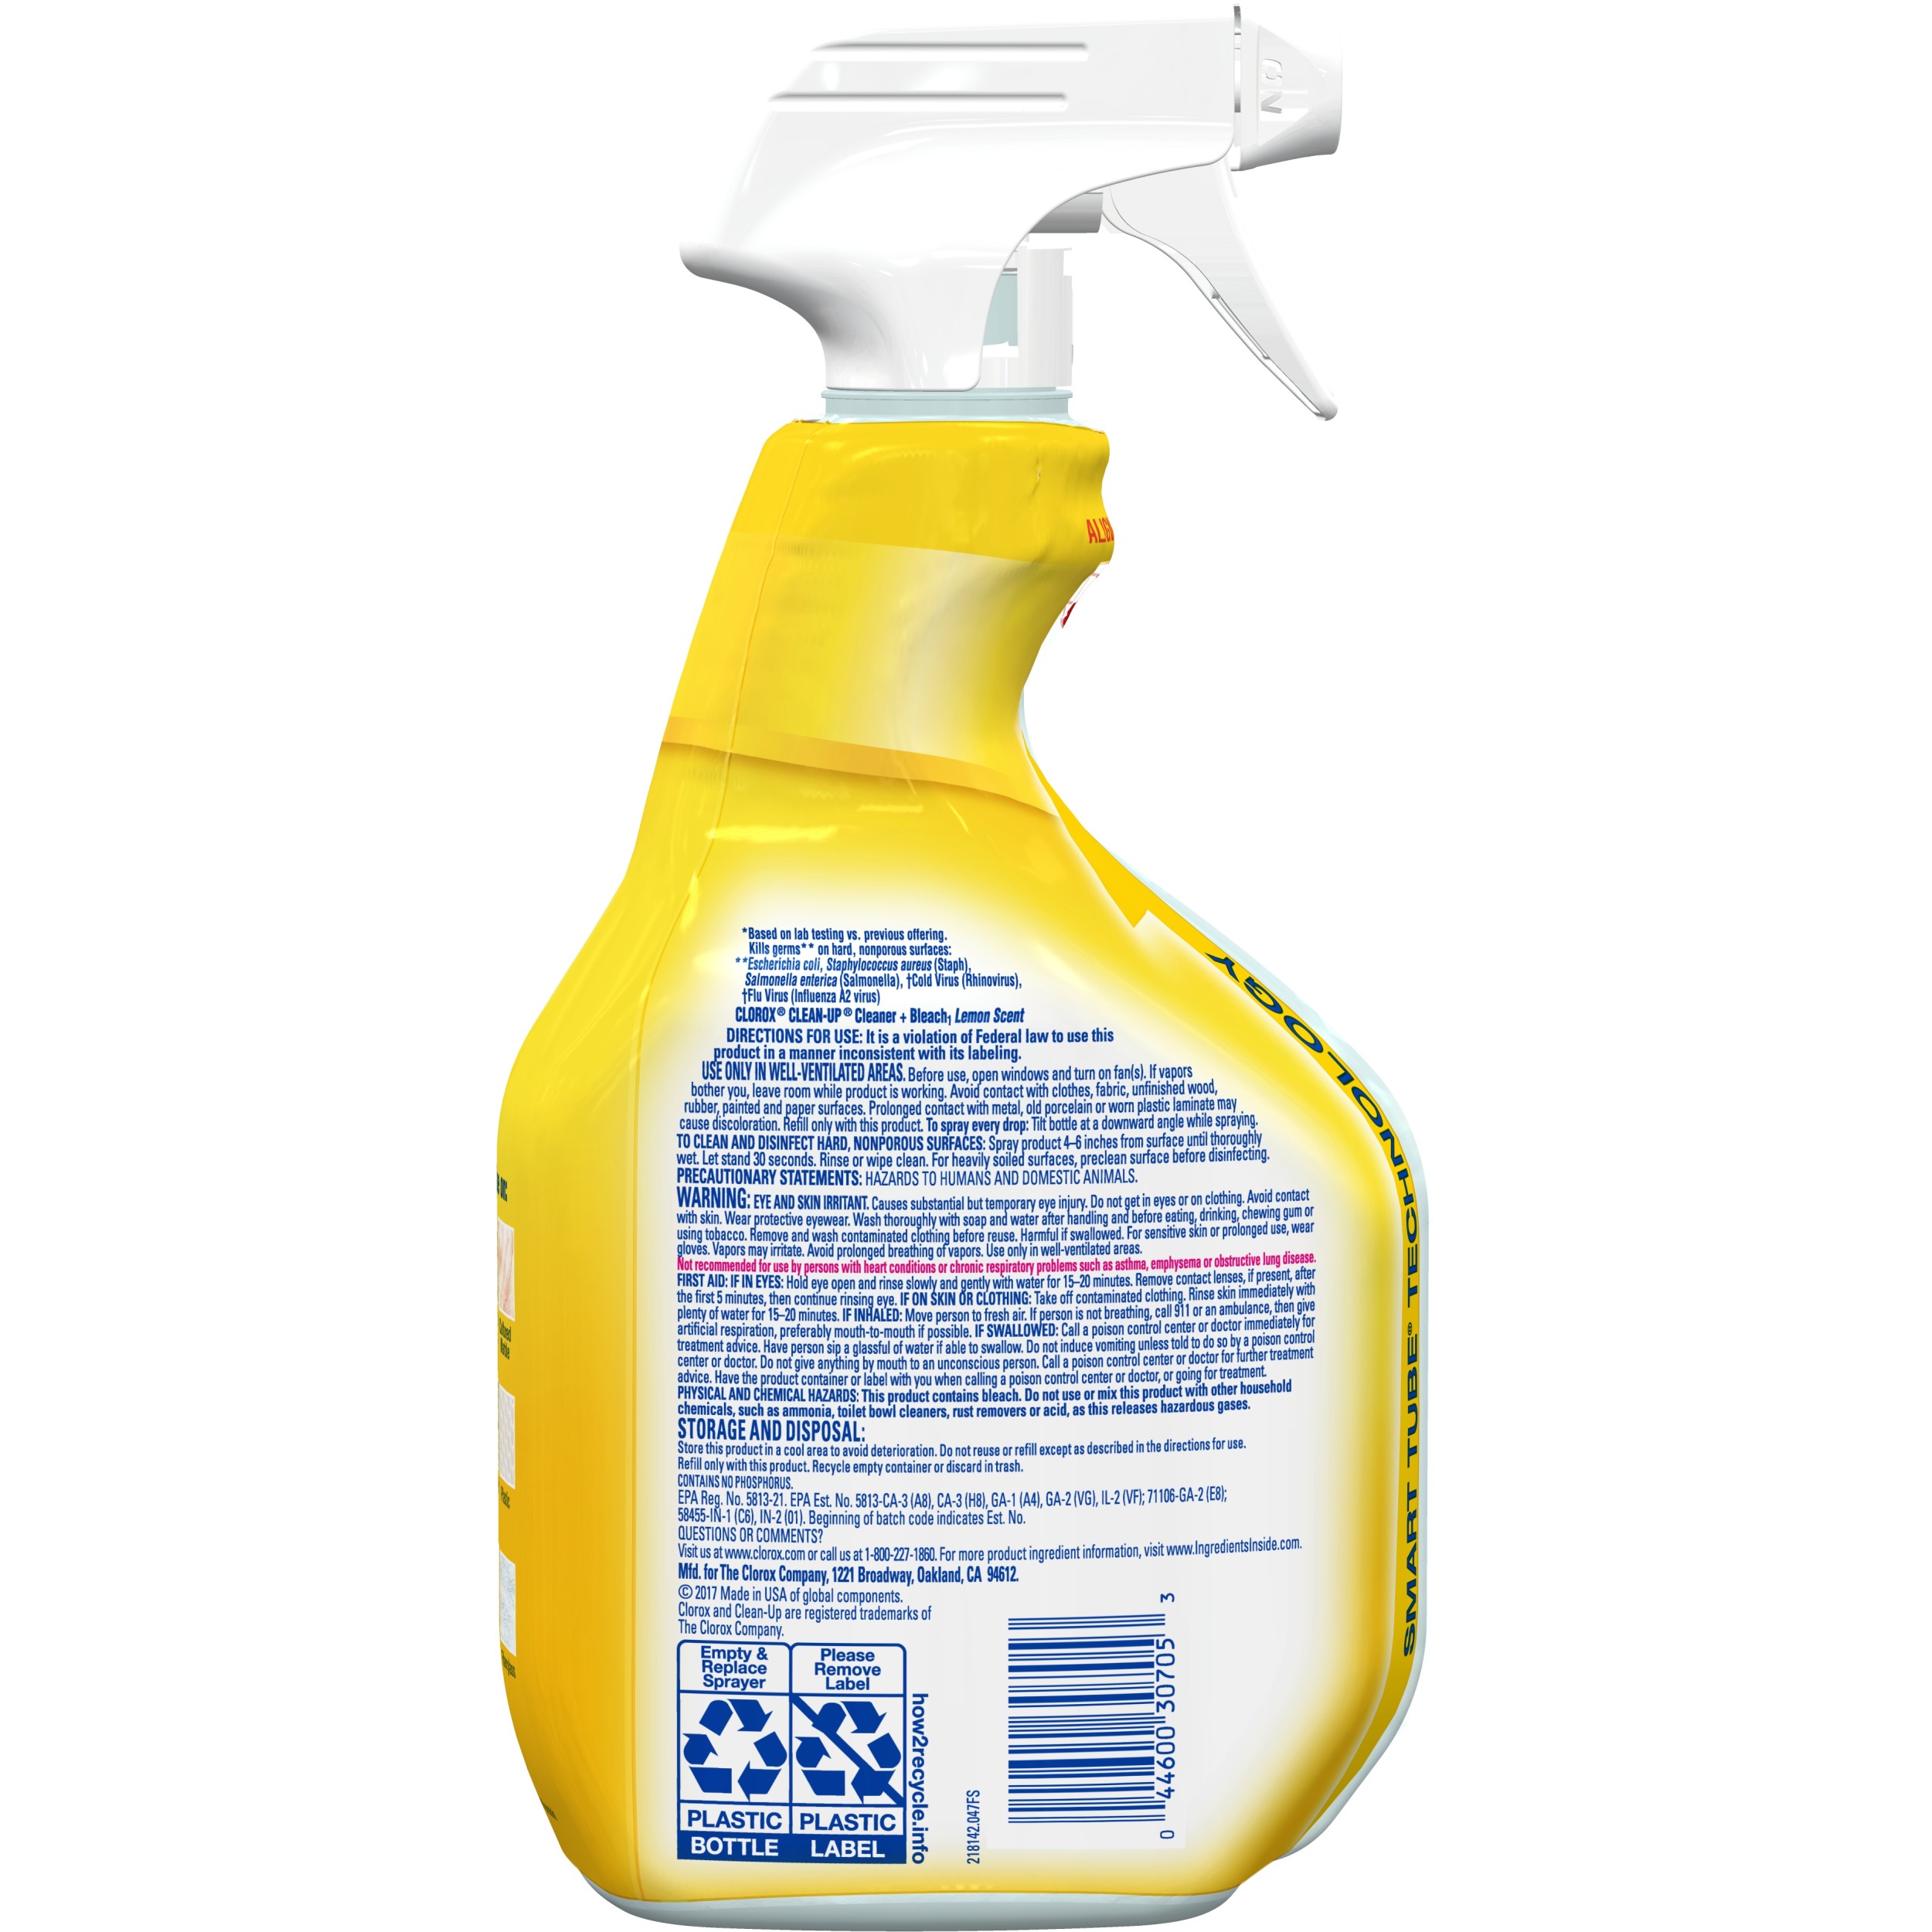 Clorox Clean-Up All Purpose Cleaner with Bleach, Spray Bottle, Lemon Scent, 32 oz - image 5 of 10